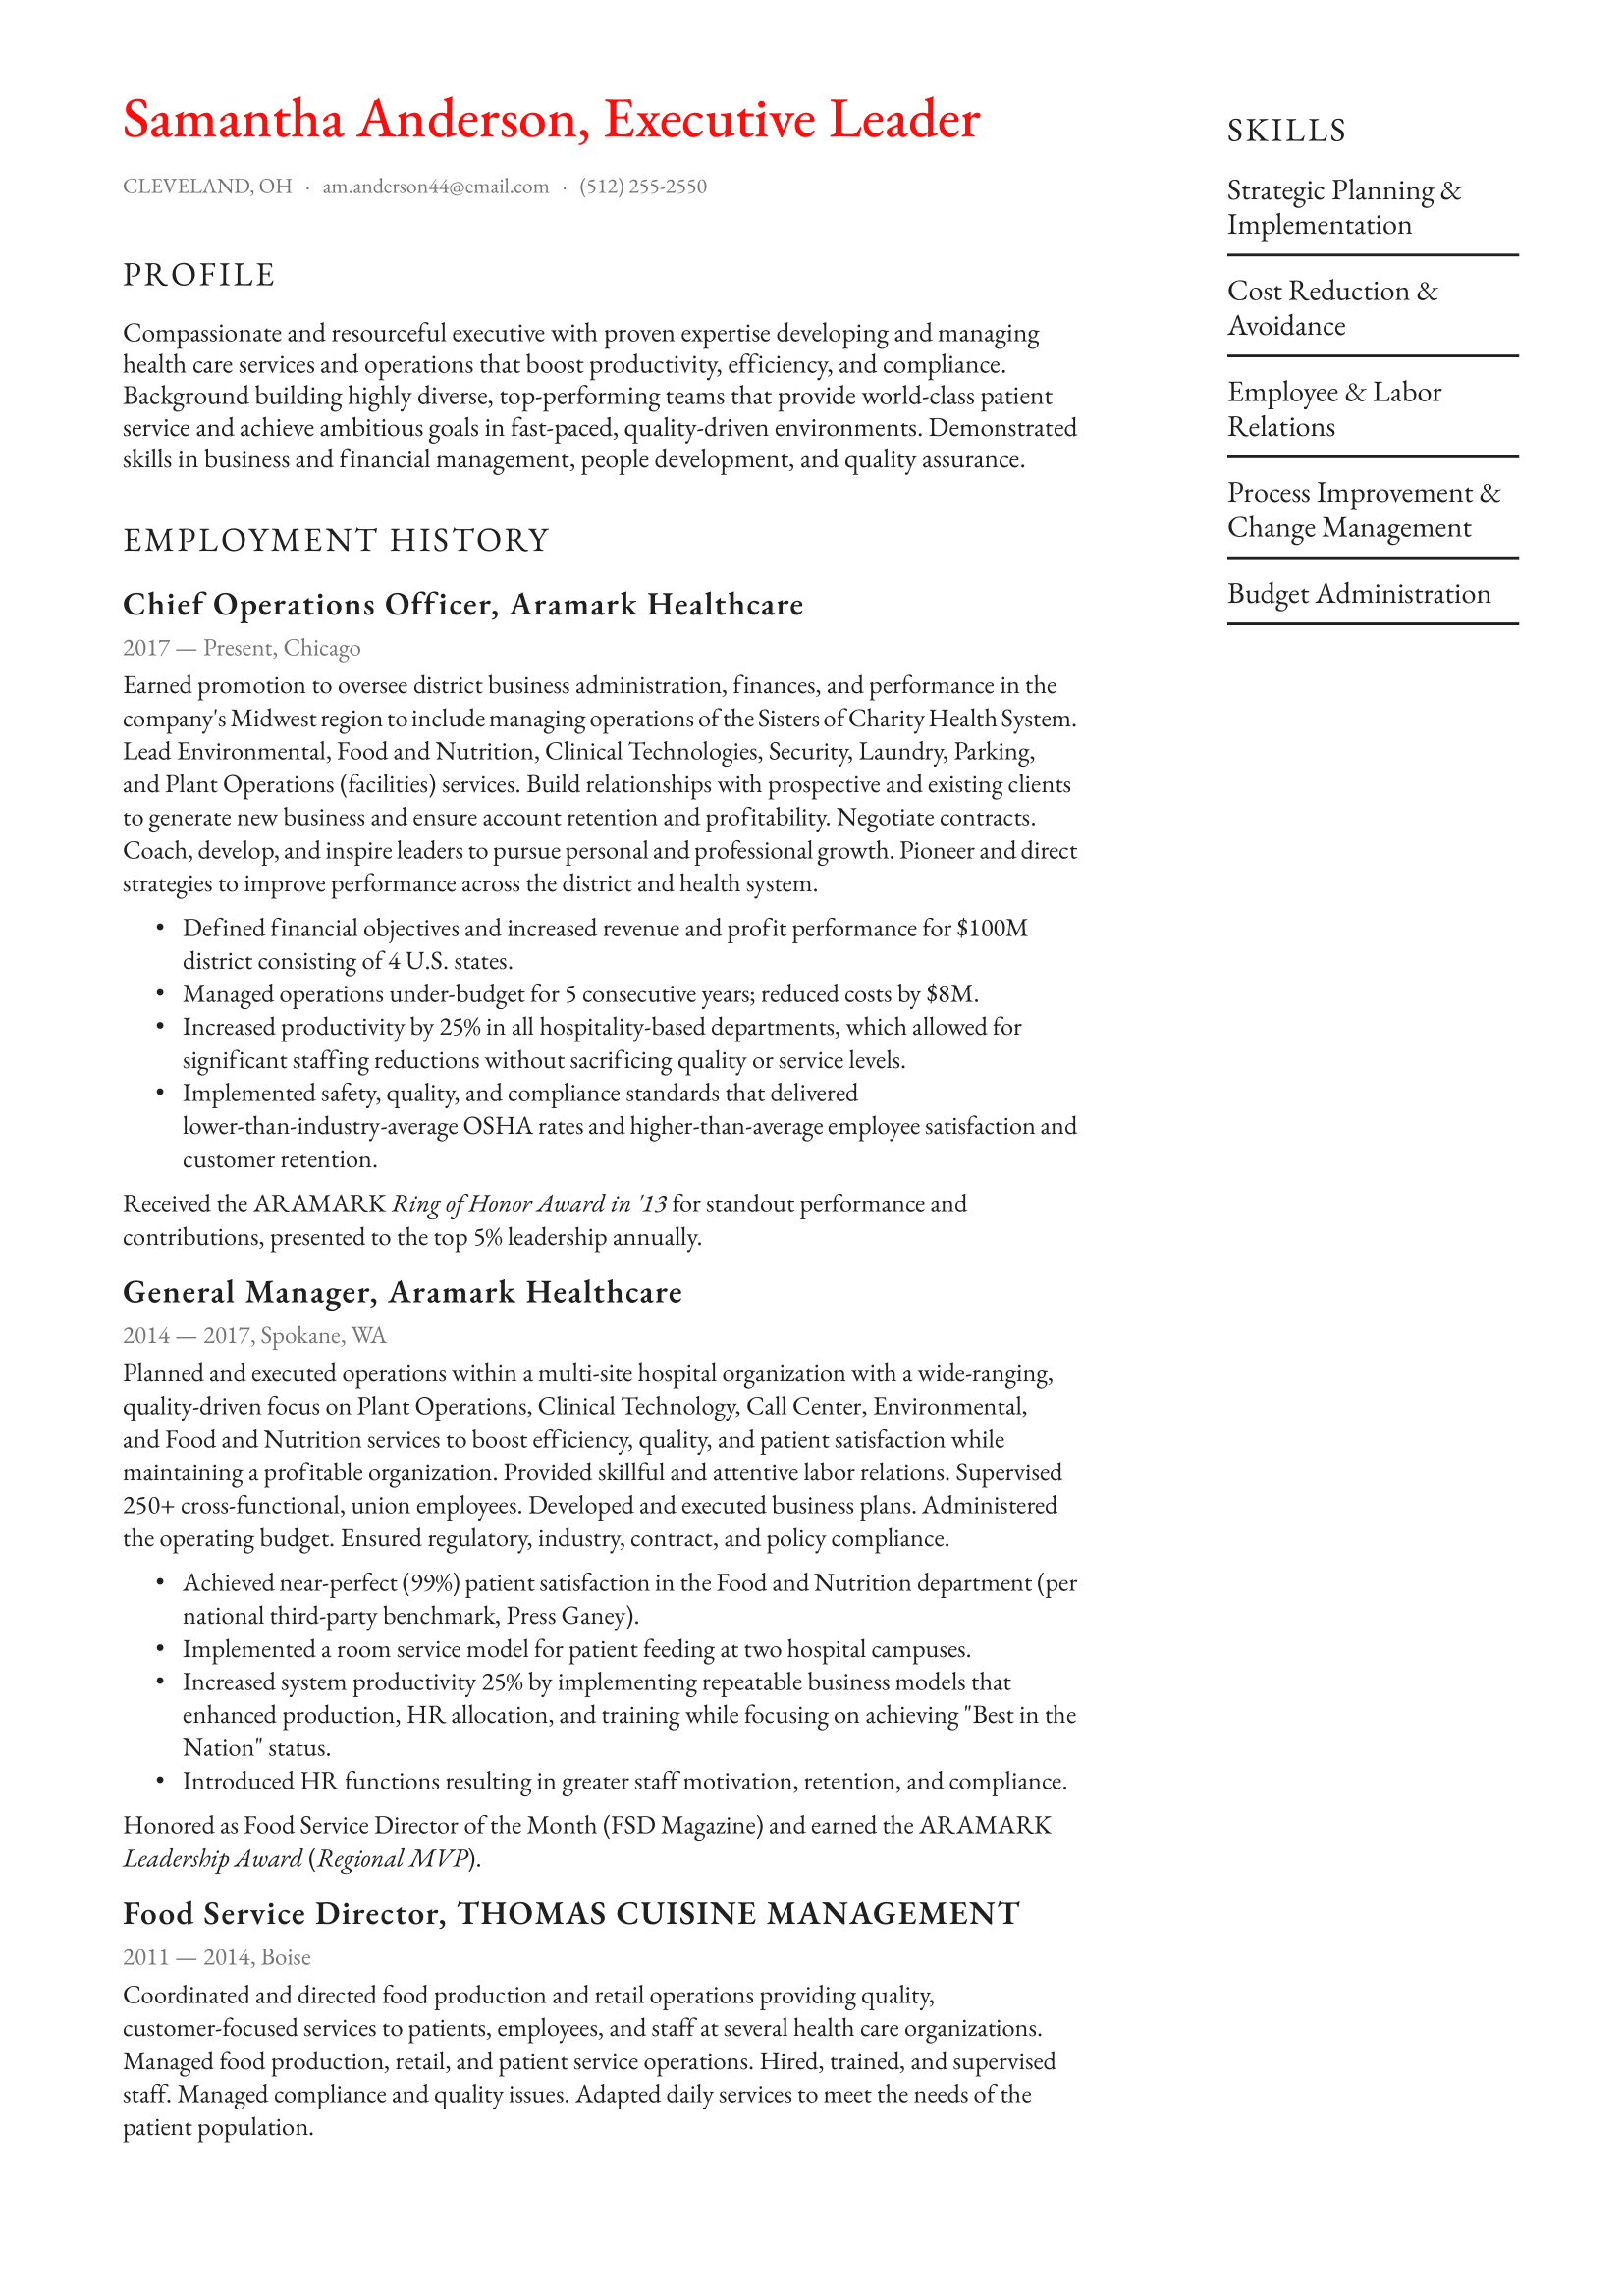 Executive Leader Resume Example & Writing Guide